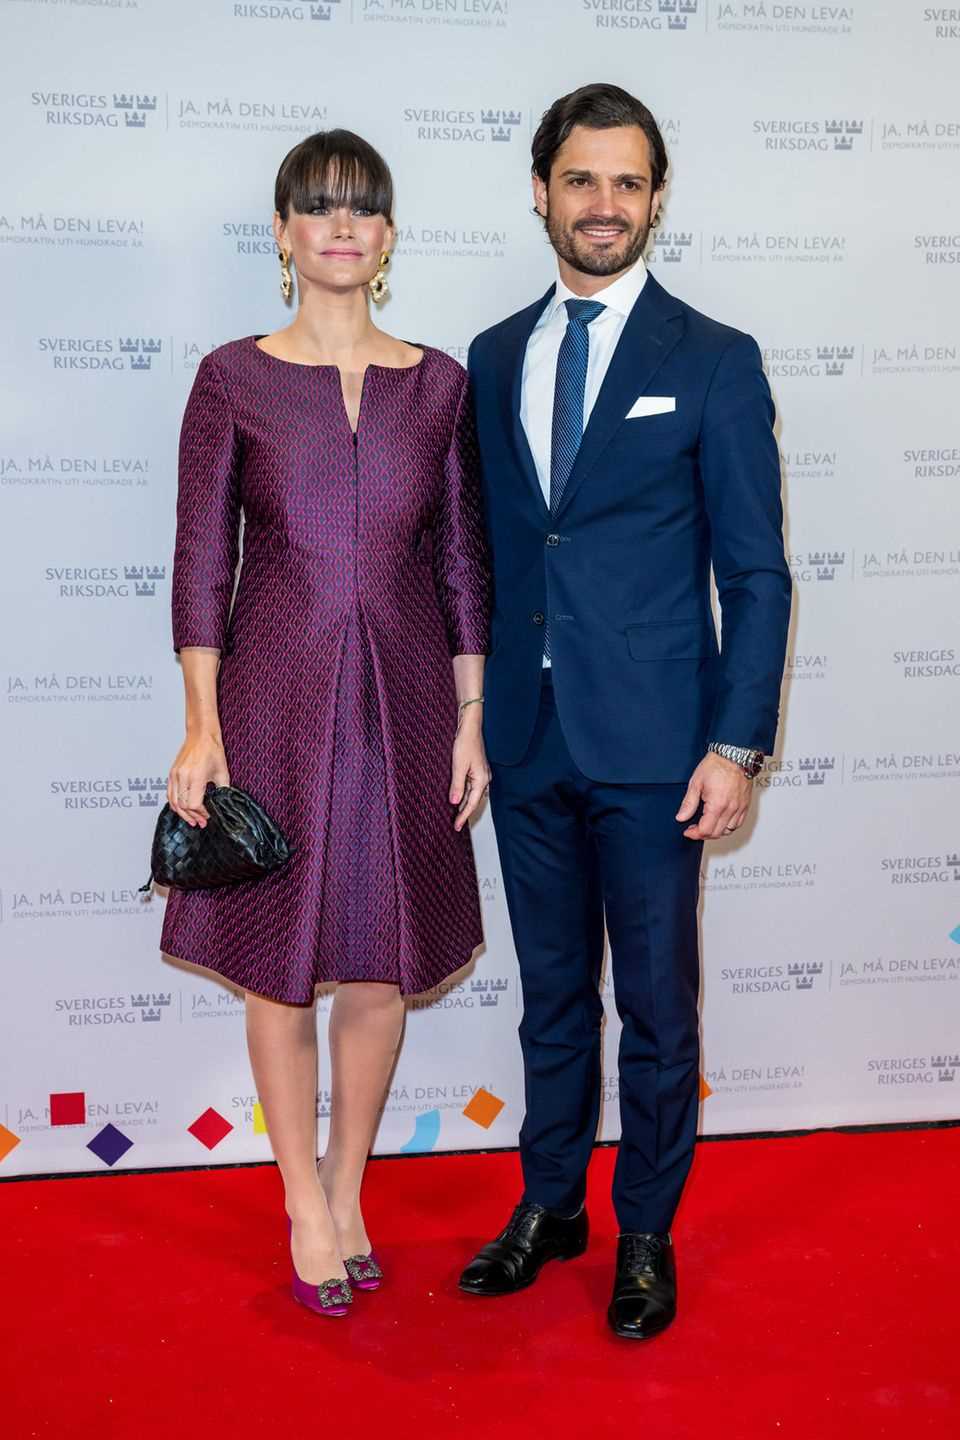 Princess Sofia and Prince Carl Philip on the red carpet